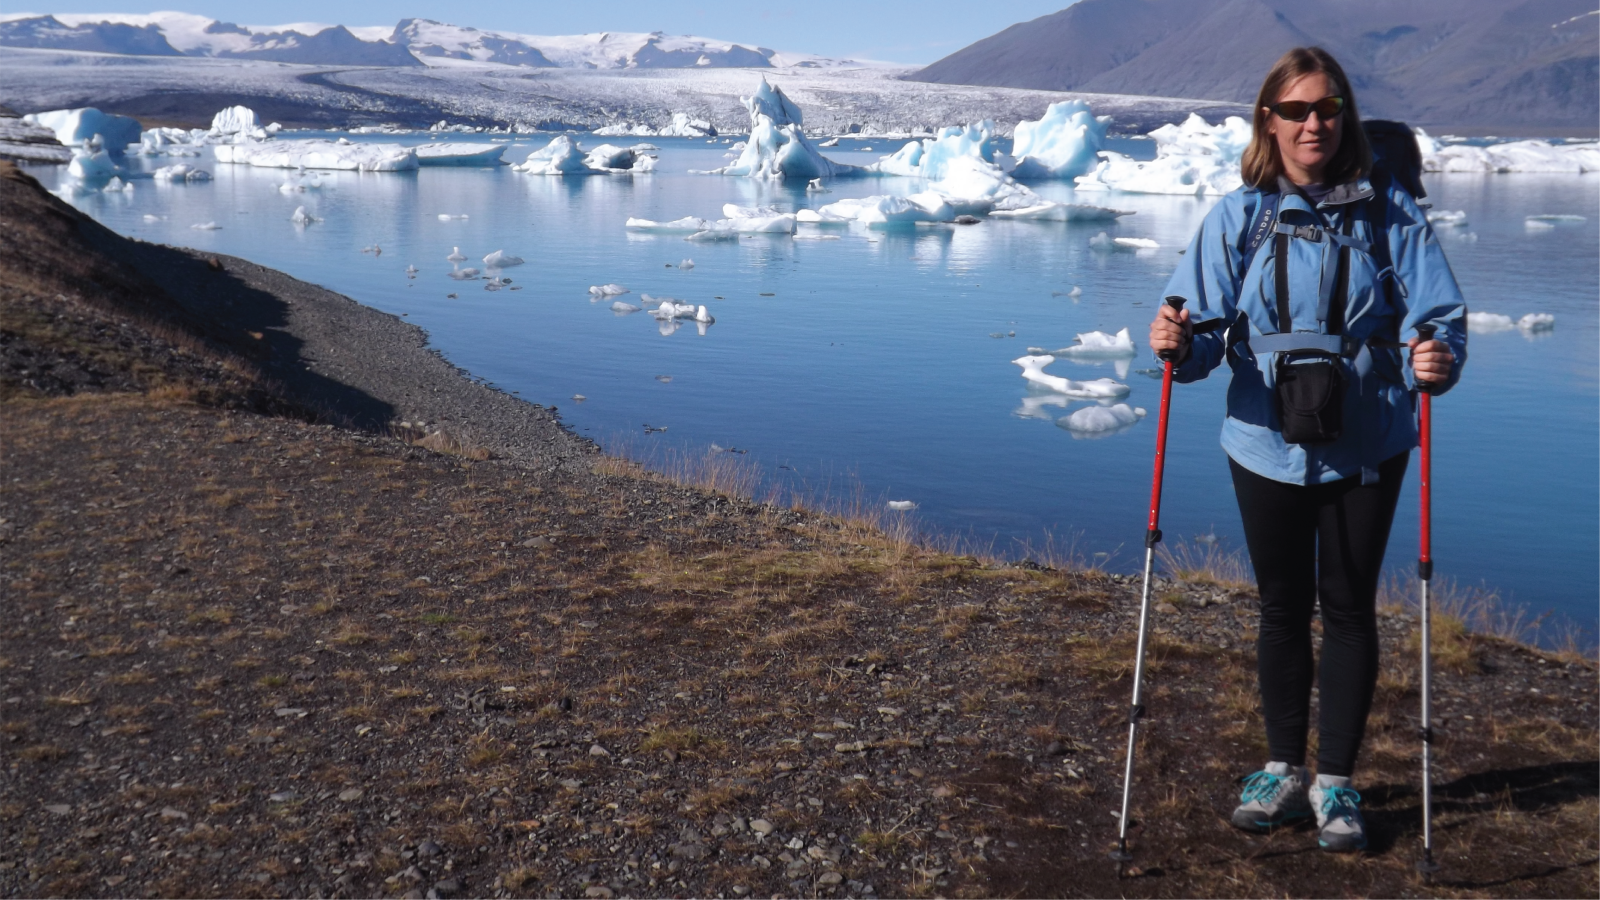 Sandra Passchier with hiking poles in an icy climate